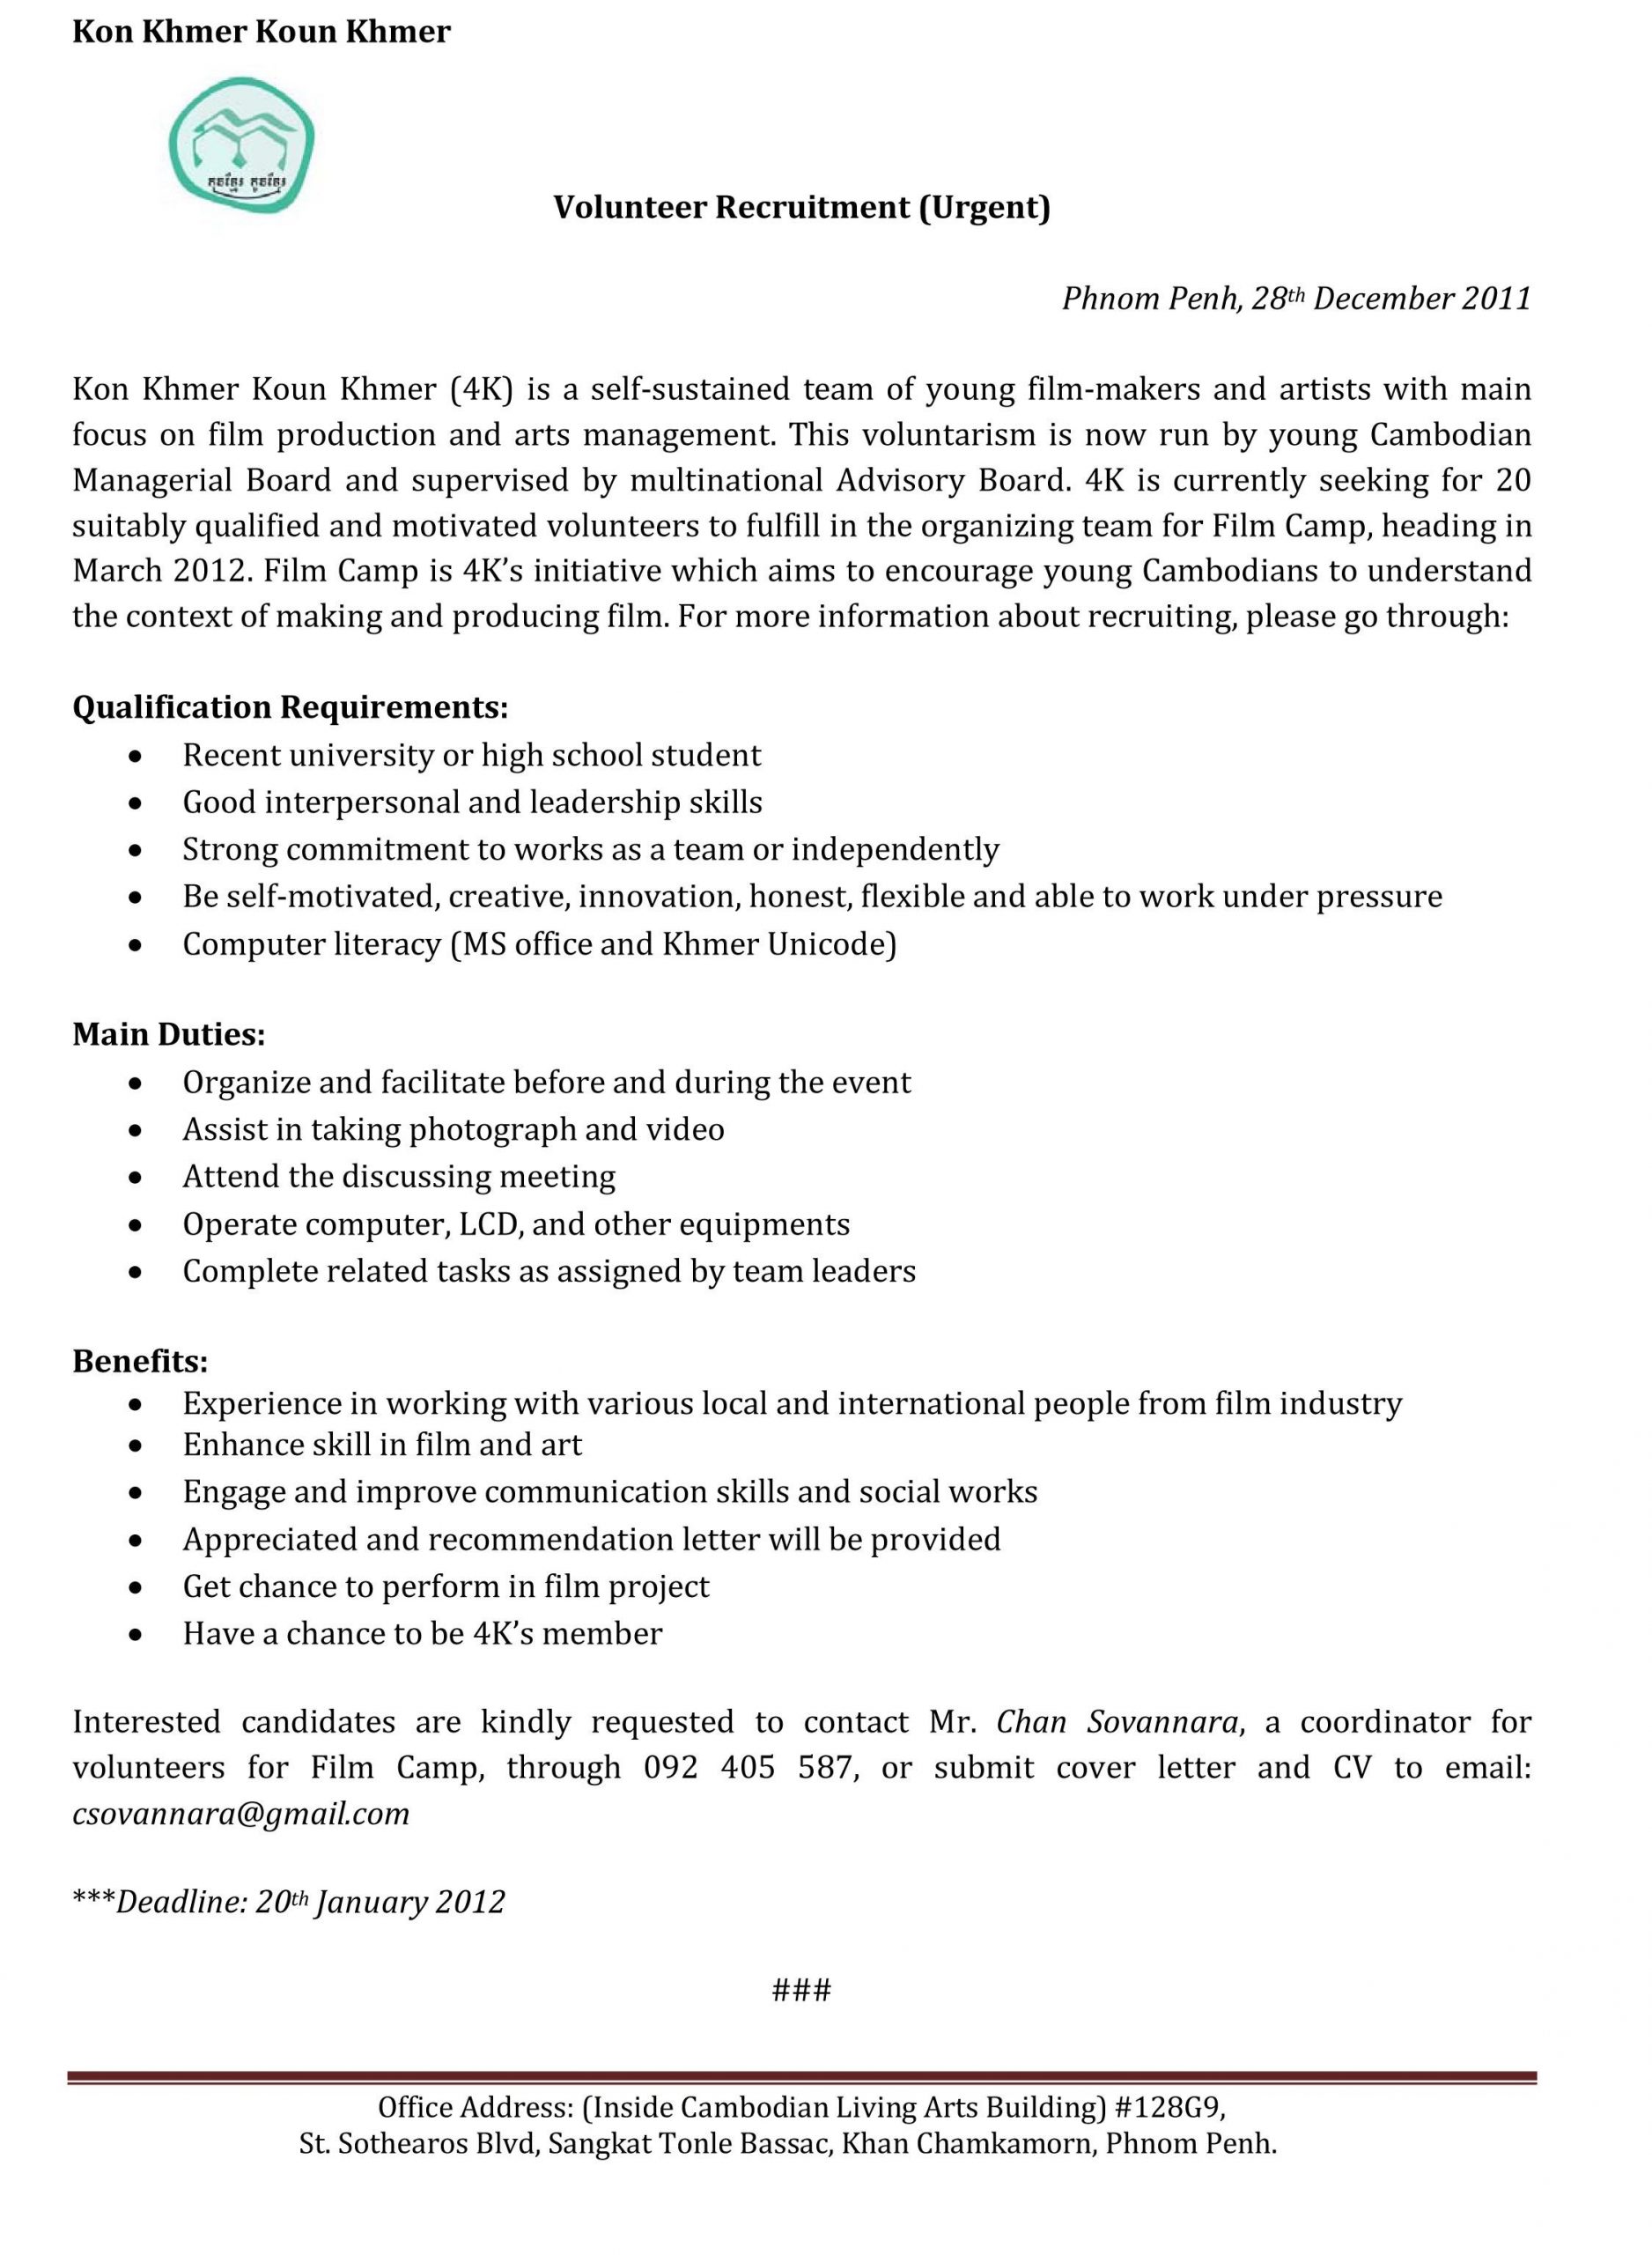 Sample Application Letter For Volunteer Position with regard to dimensions 2248 X 3067